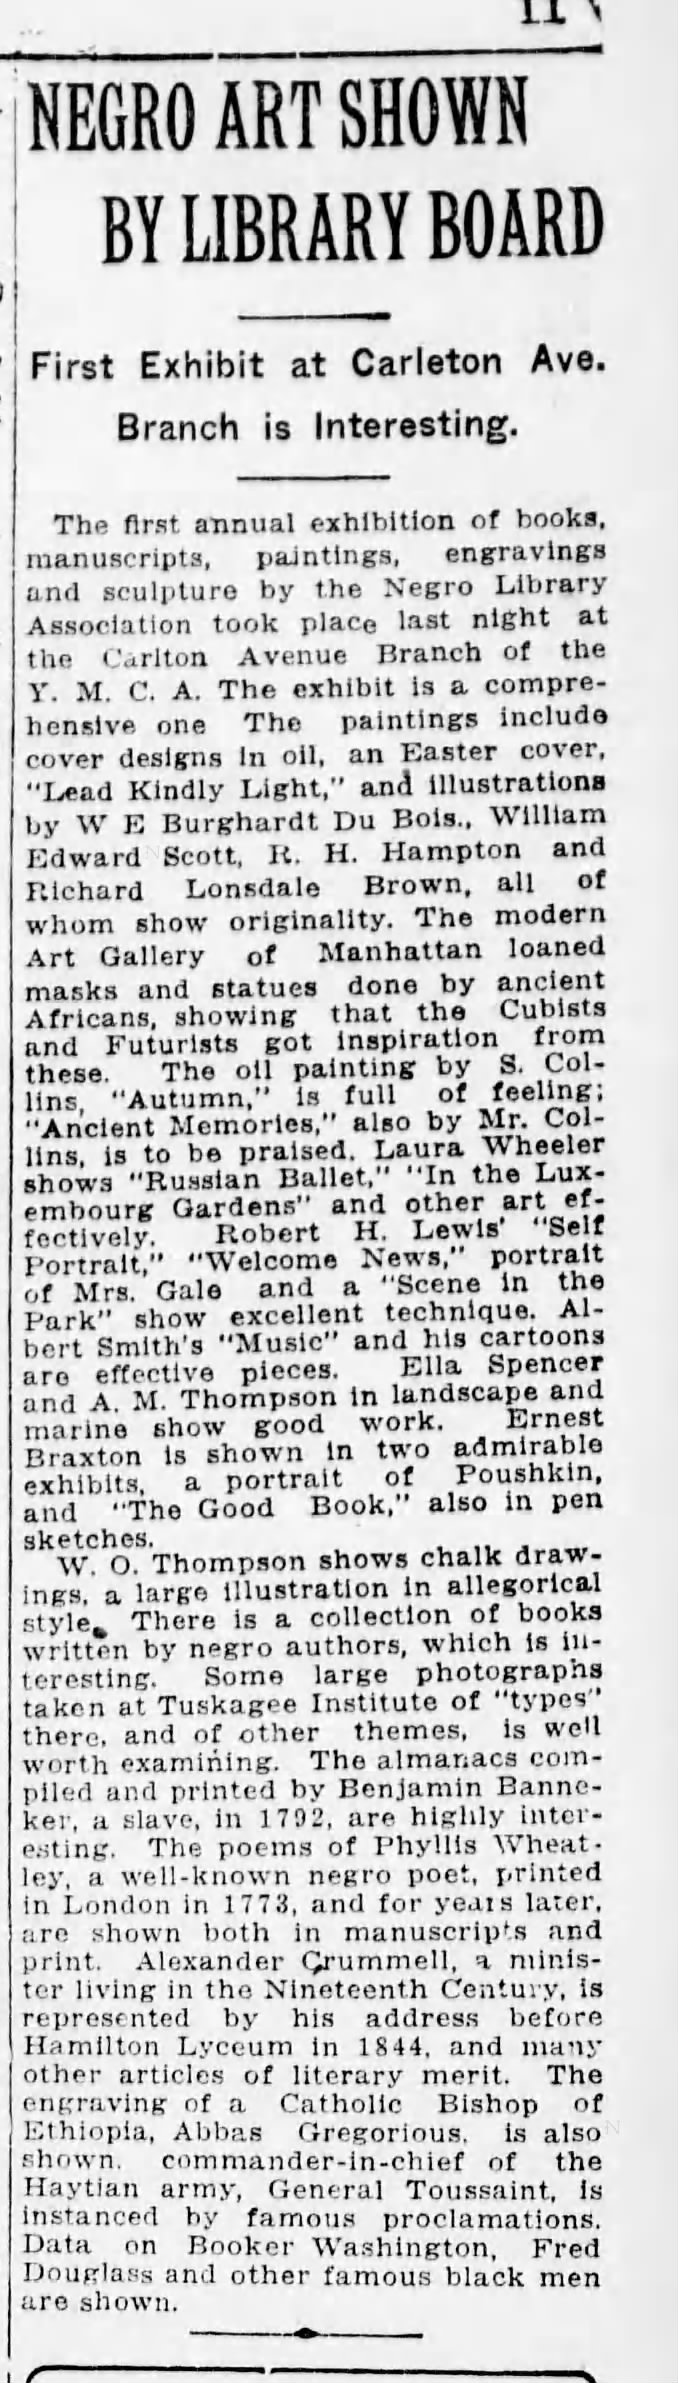 Laura showing at library in Brooklyn 1918